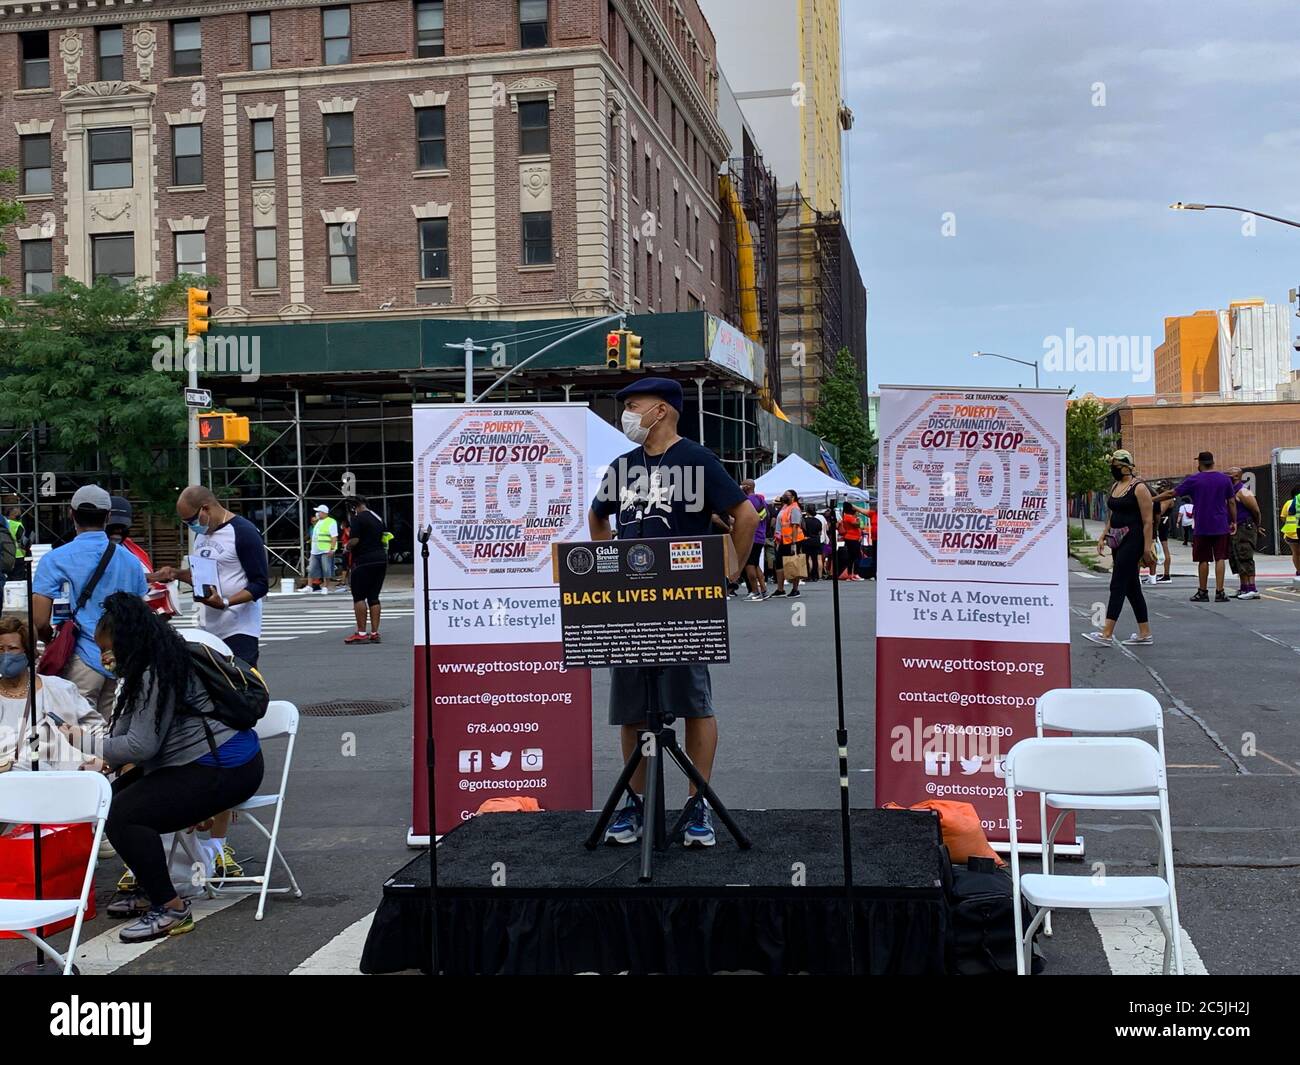 New York, USA. 3rd July, 2020. (NEW) Launching of Black Lives MatterÃ¢â‚¬â„¢s Mural in Harlem. July 3, 2020, Harlem, New York, USA: The official launching of the Black Lives MatterÃ¢â‚¬â„¢s Mural on Adam Clayton Powell jr Boulevard with W 125 to 127 streets in Harlem which is closed to the public from July 2nd till July 10th . They are protesting against the police murder of George Floyd in Minneapolis on May 25 and police brutality on blacks . Credit : Niyi Fote/Thenews2 Credit: Niyi Fote/TheNEWS2/ZUMA Wire/Alamy Live News Stock Photo